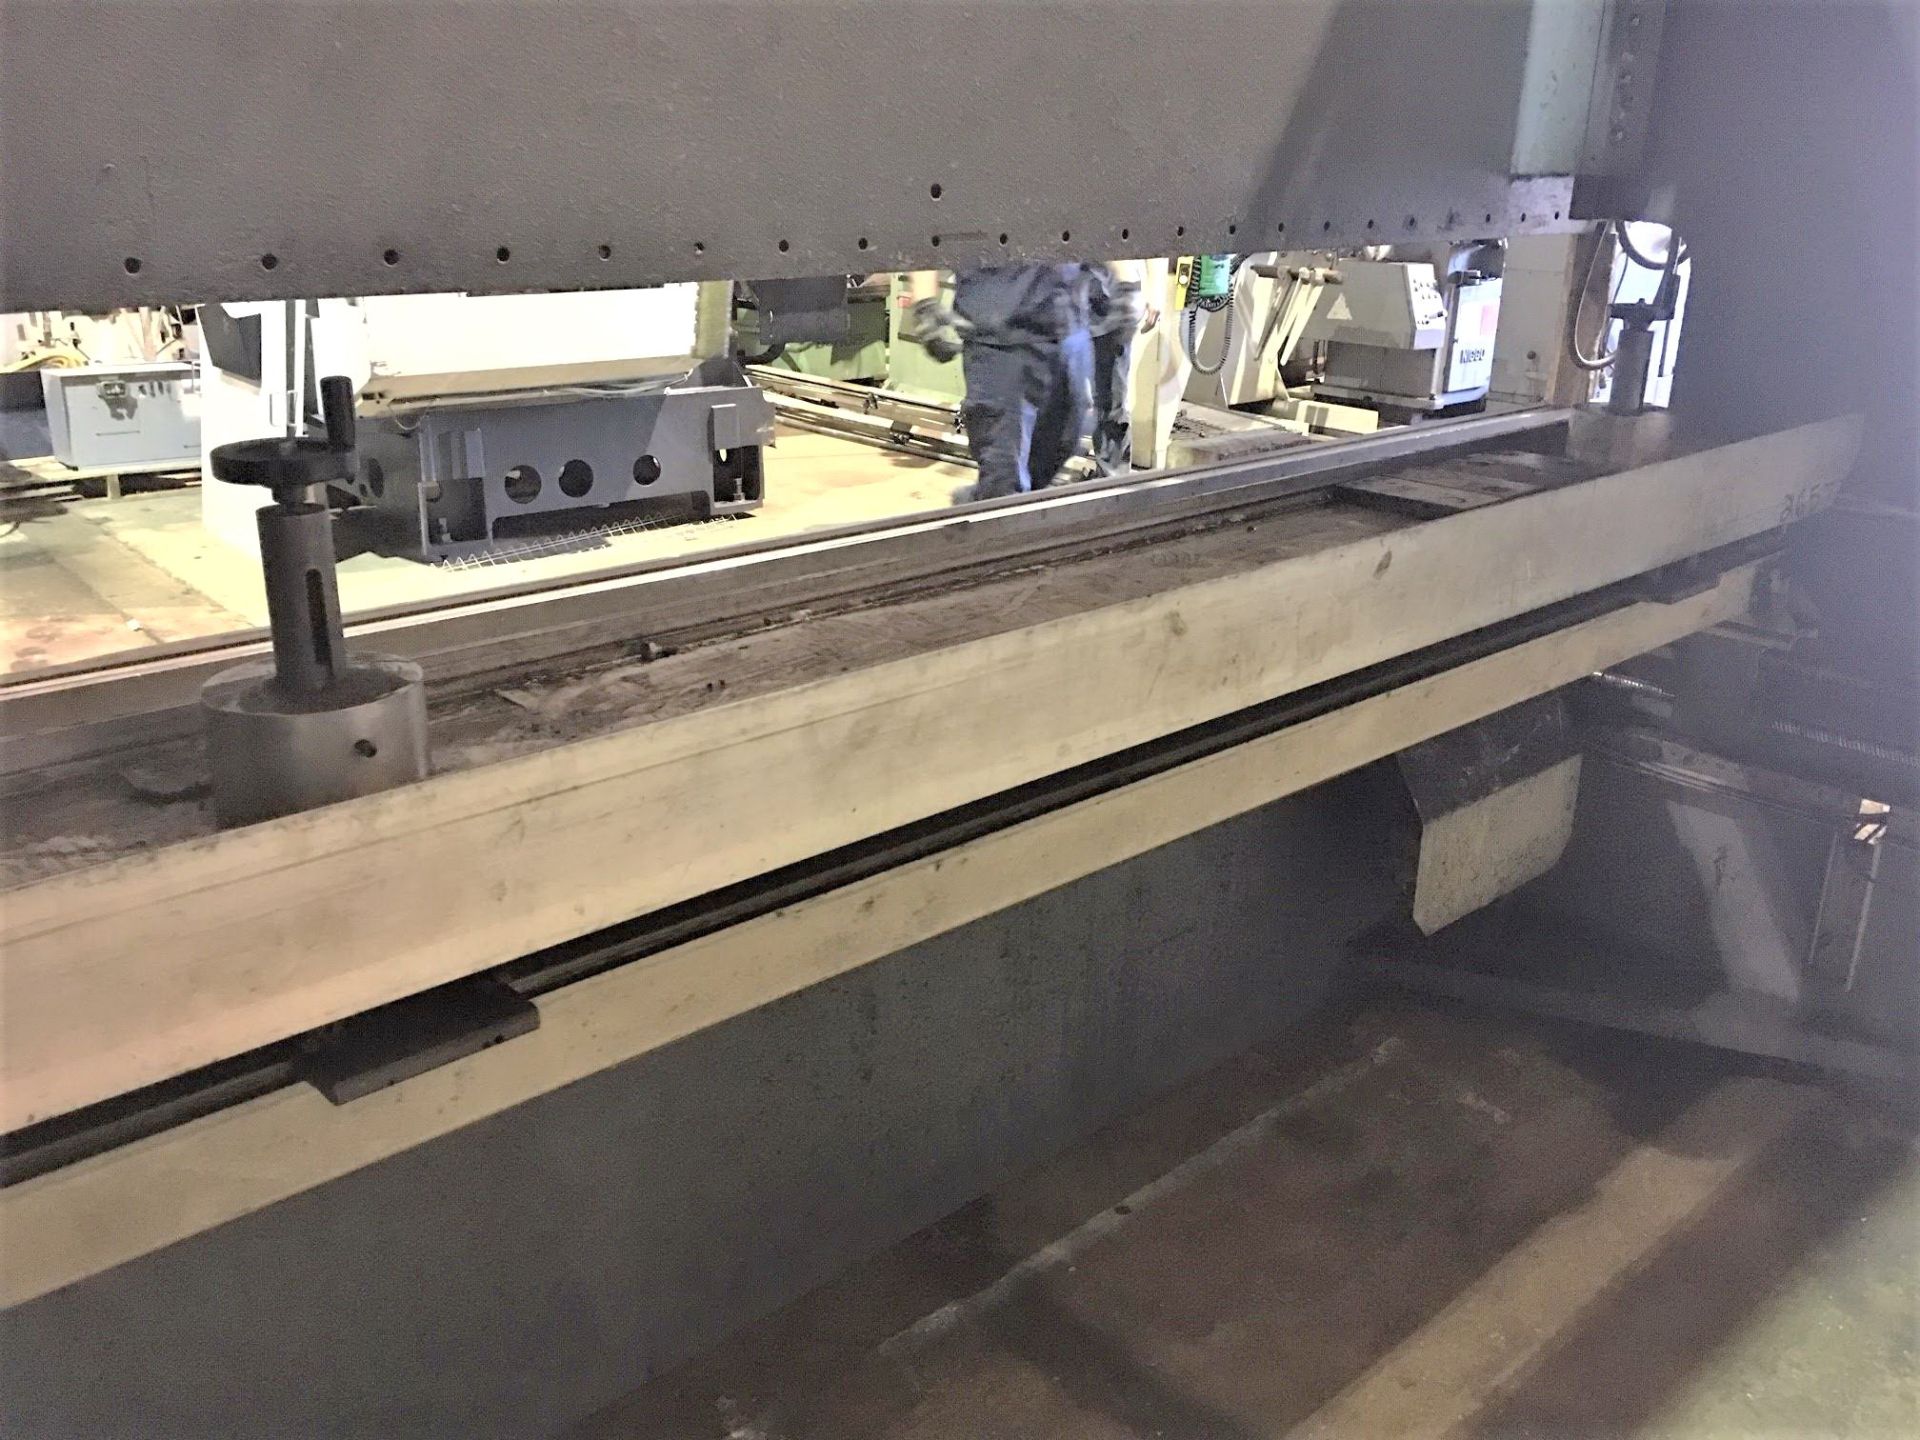 Haco Atlantic CNC Hydraulic Press Brake 120 Ton x 10', Located In Painesville, OH - 8615P - Image 7 of 14